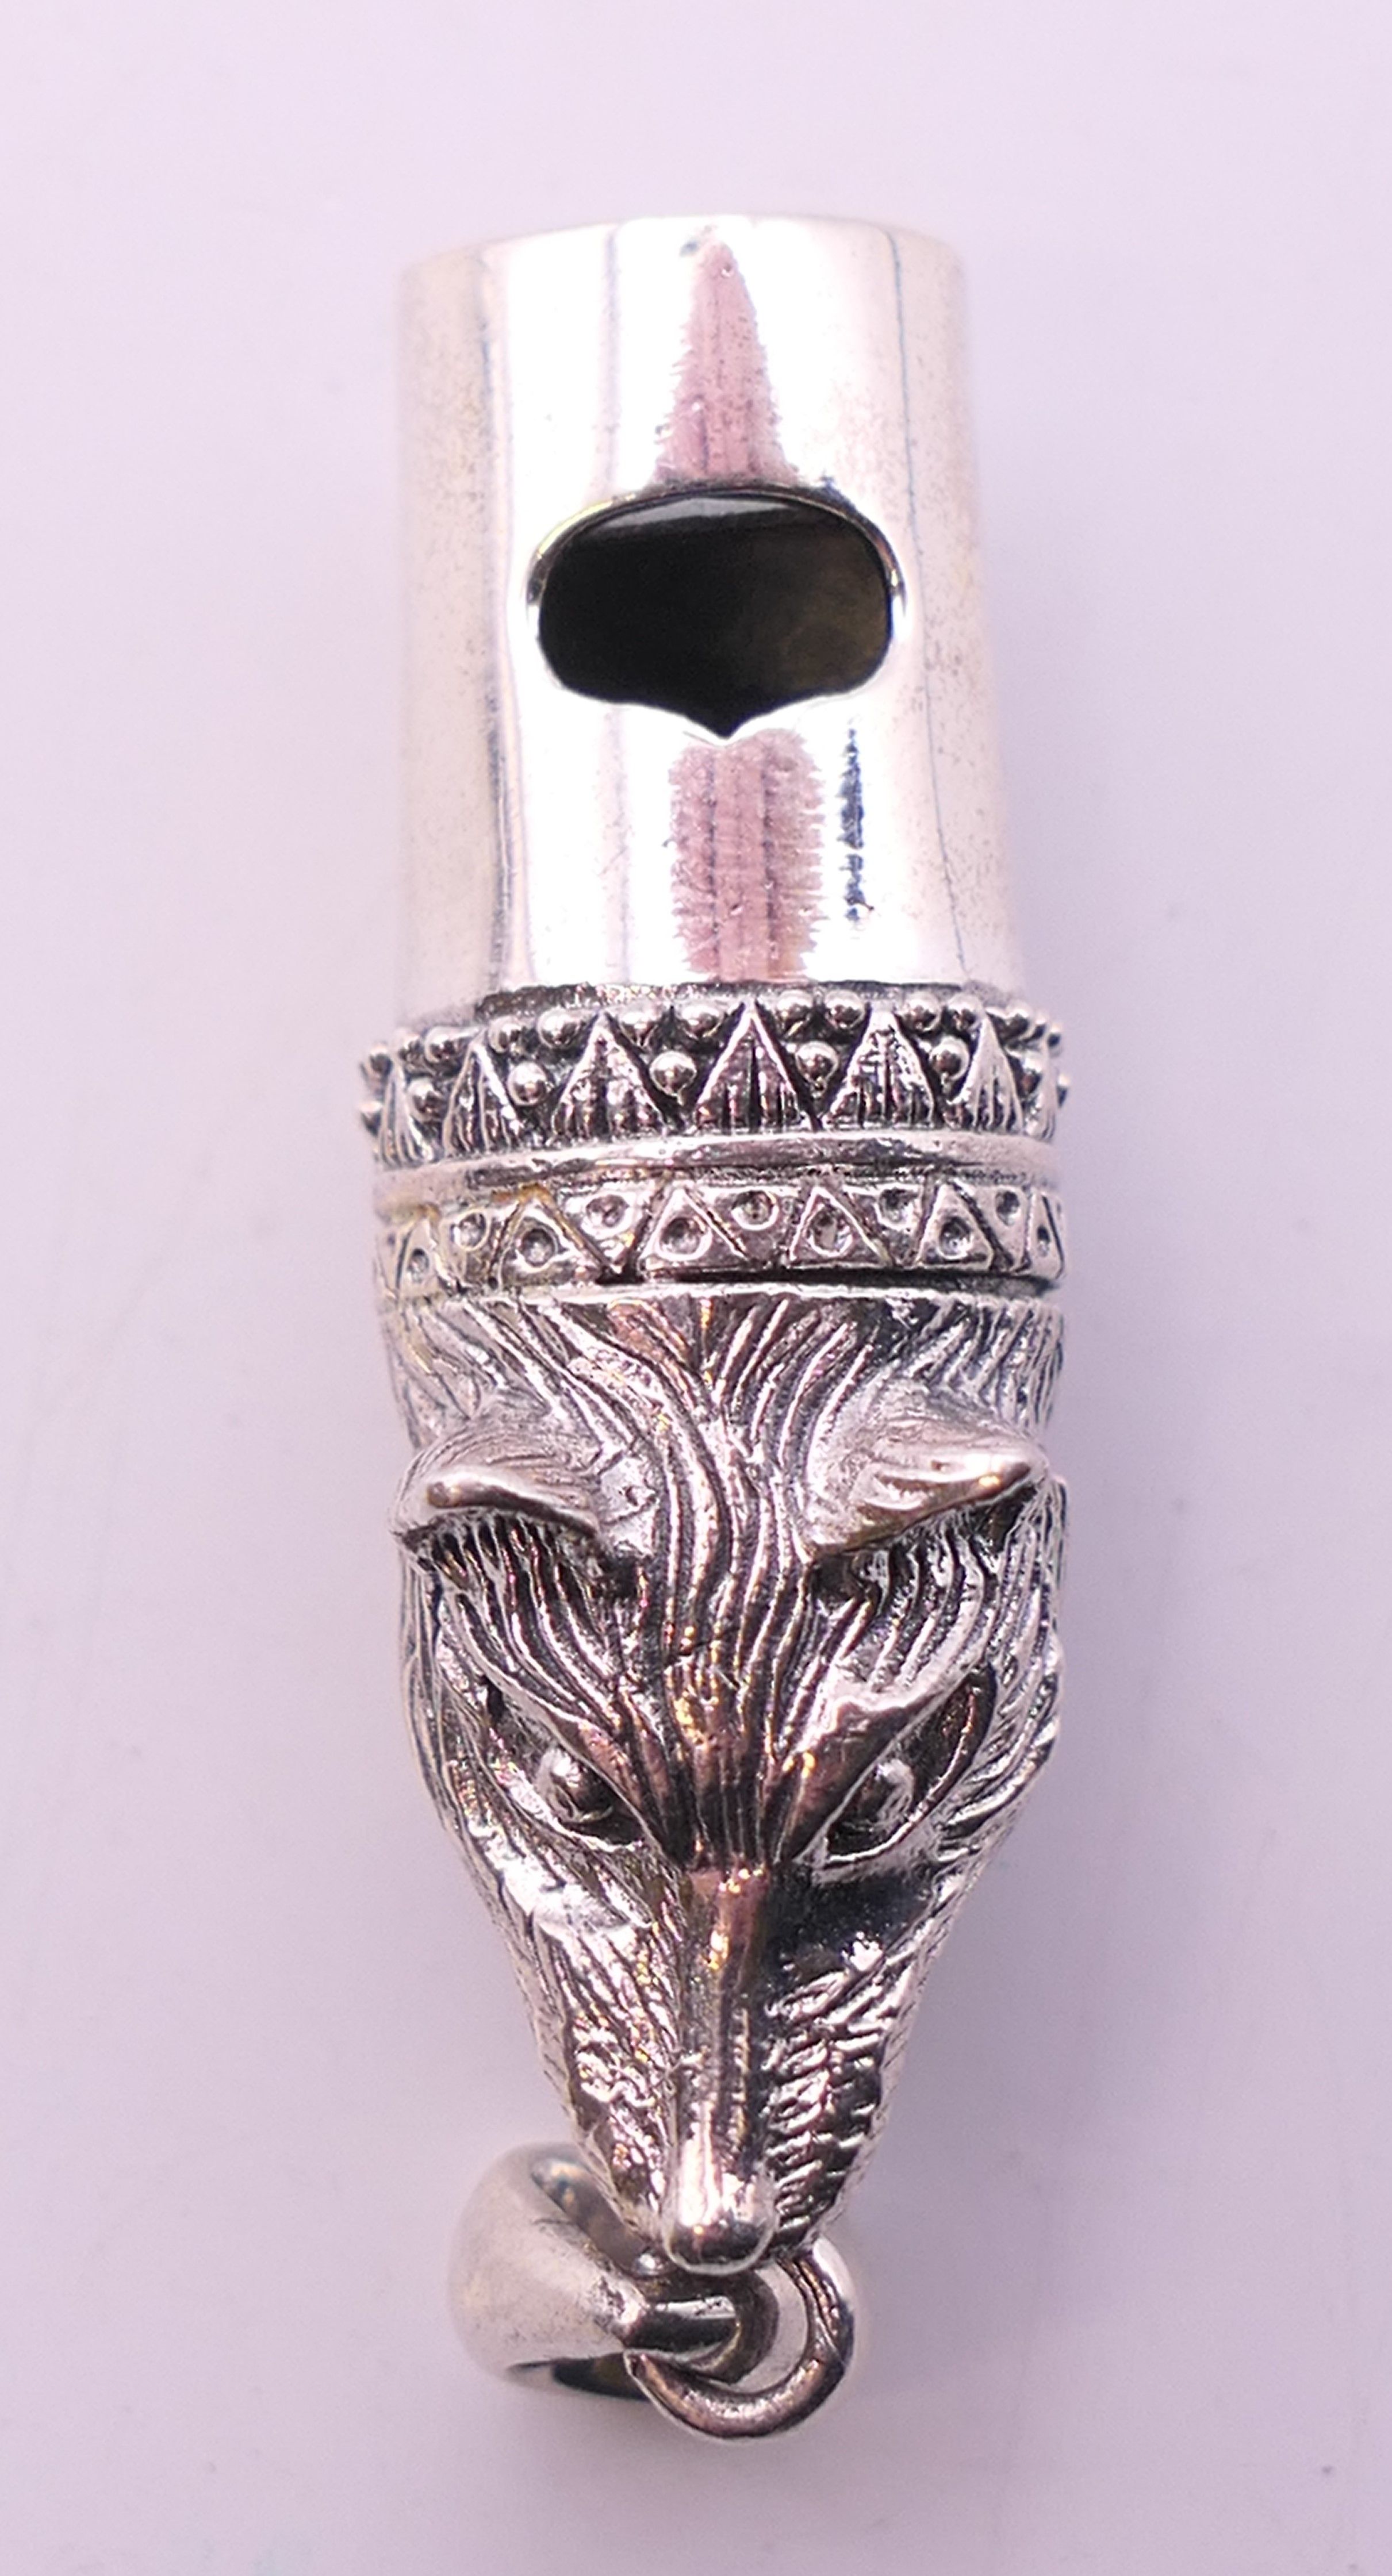 A silver fox mask whistle. 4.5 cm long overall. - Image 4 of 6